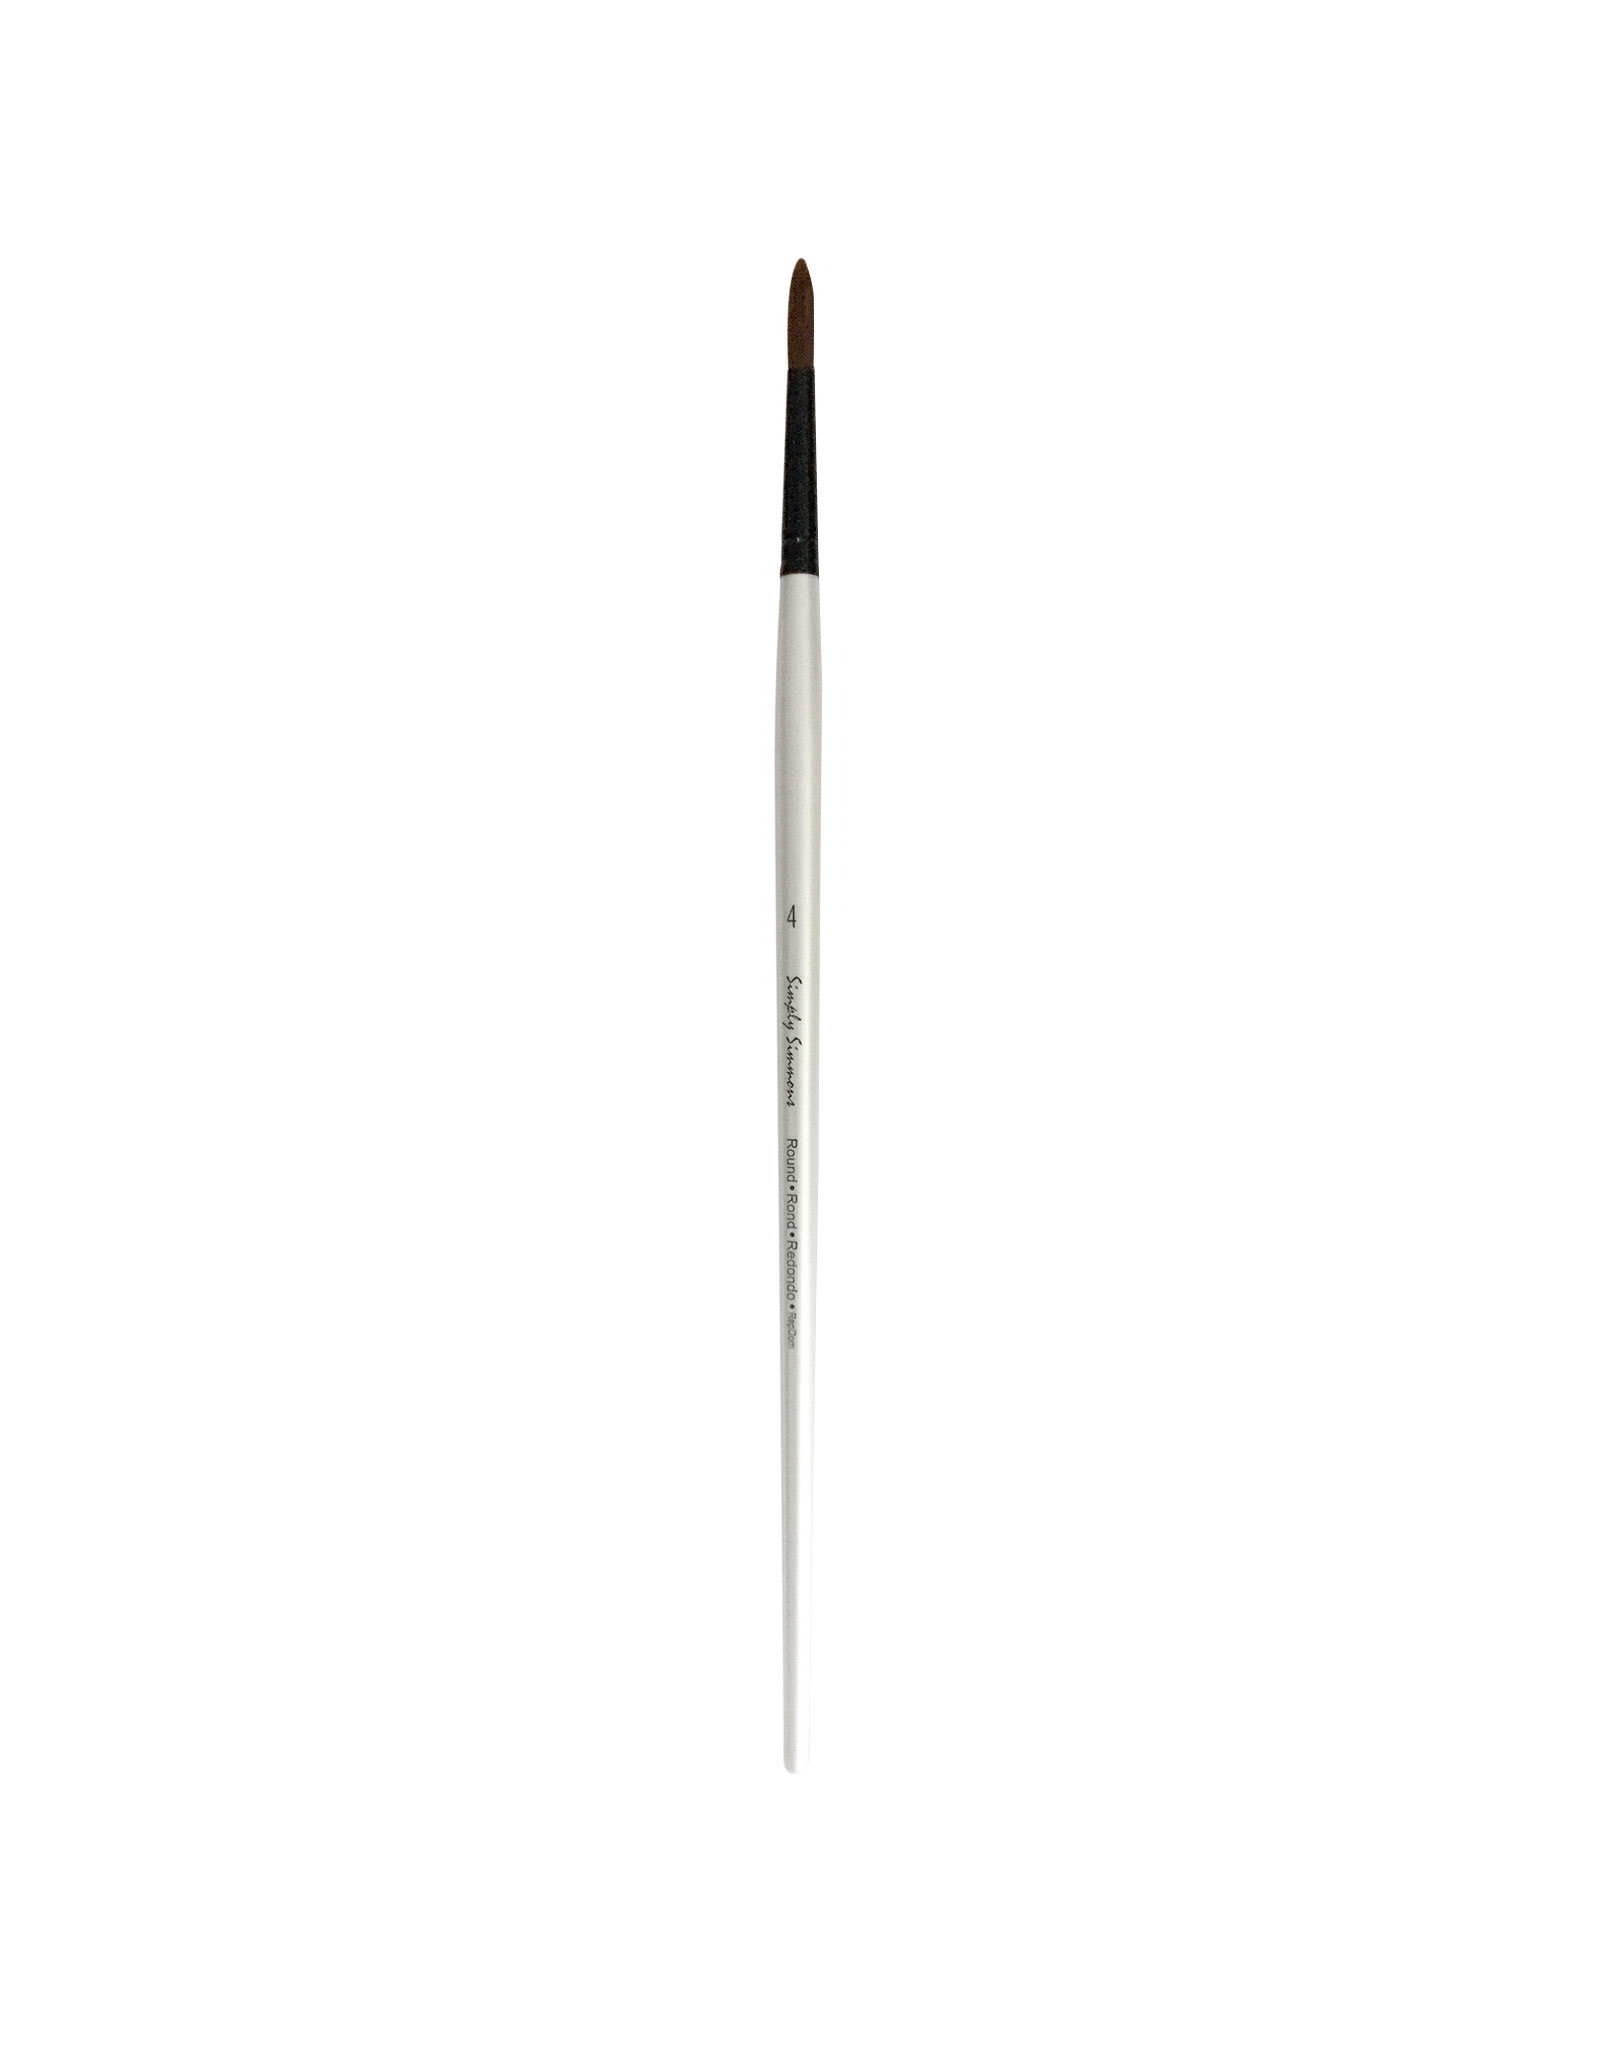 Daler-Rowney Simply Simmons Long Handle Stiff Round # 4